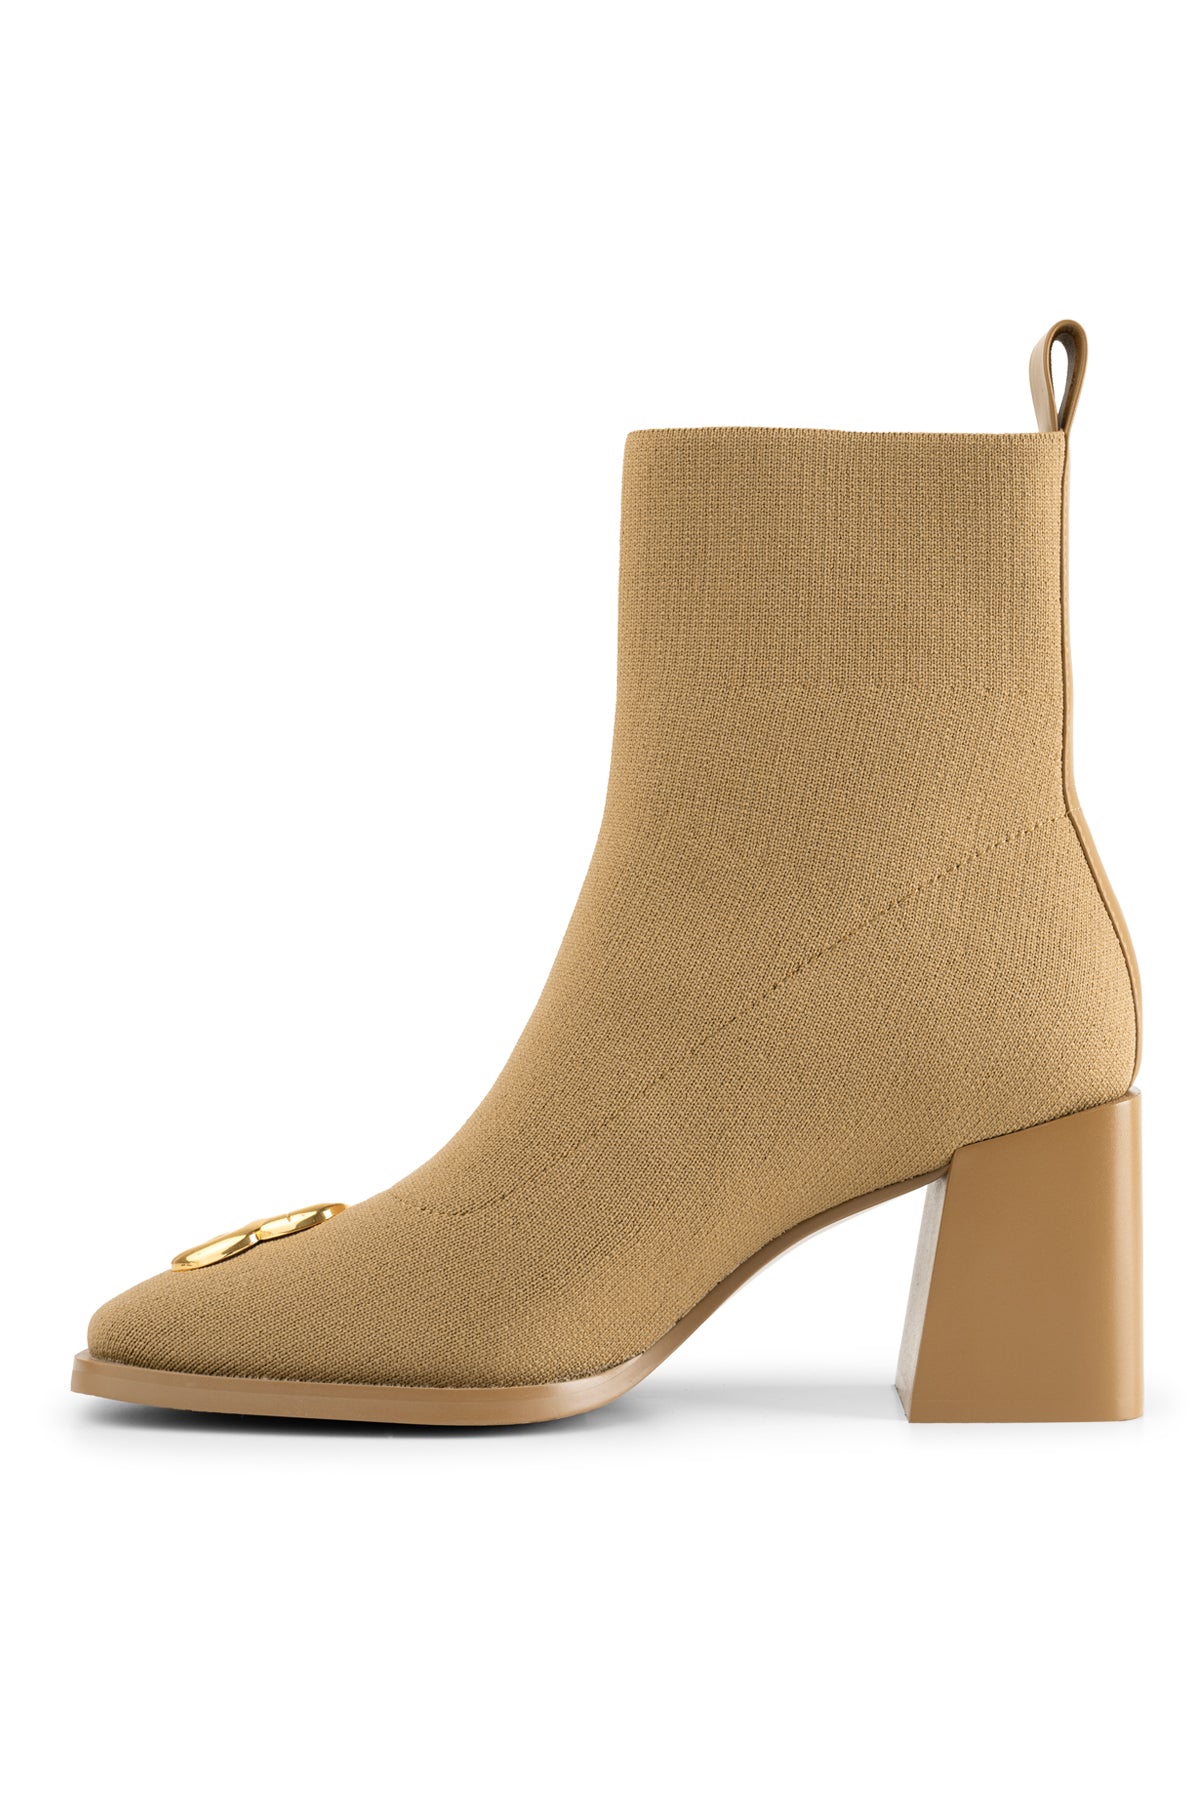 Eve Boots - Camel